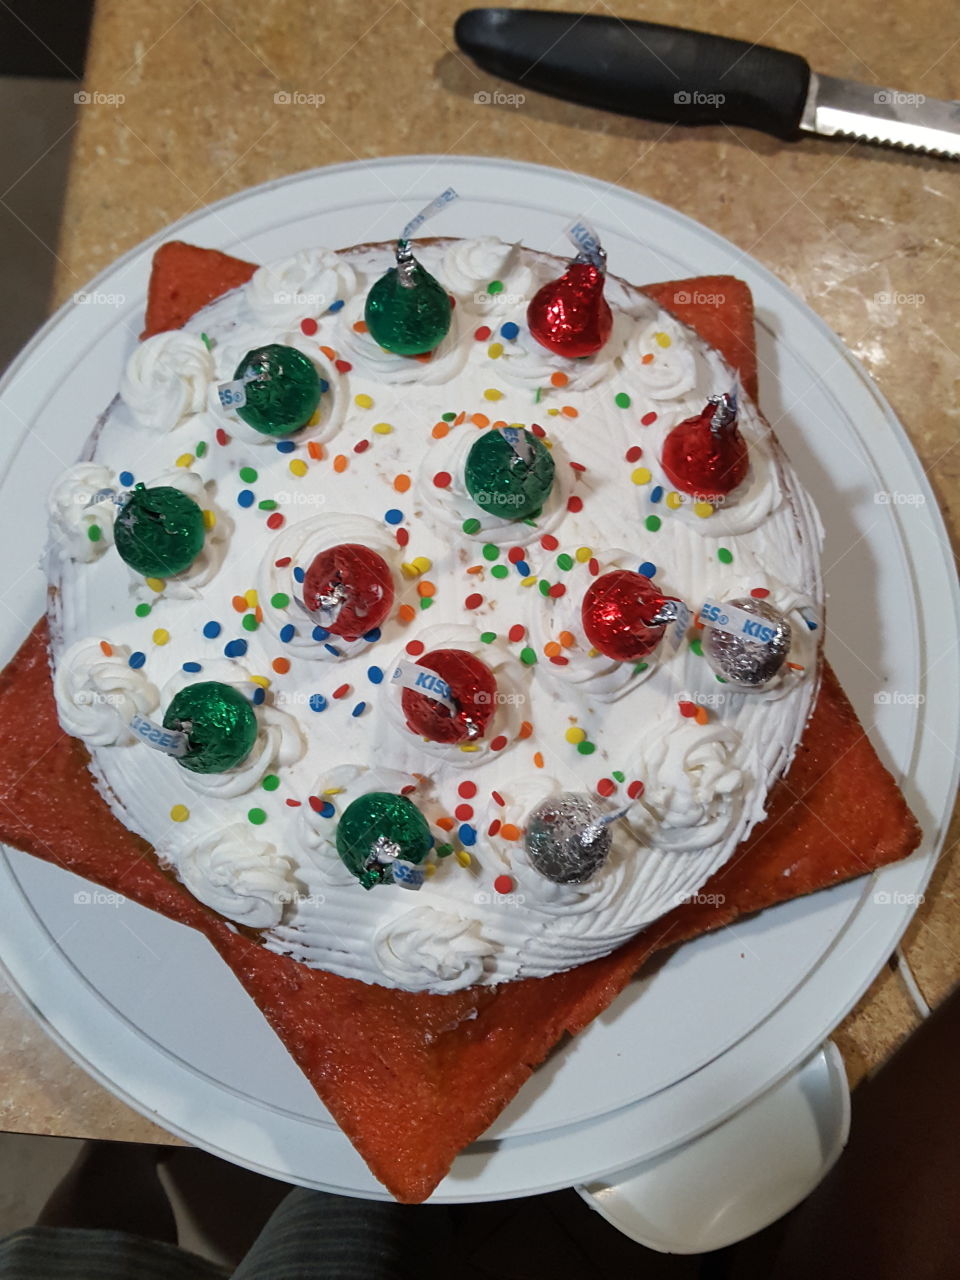 I love to bake so I decided to bake a cake for my Friends.